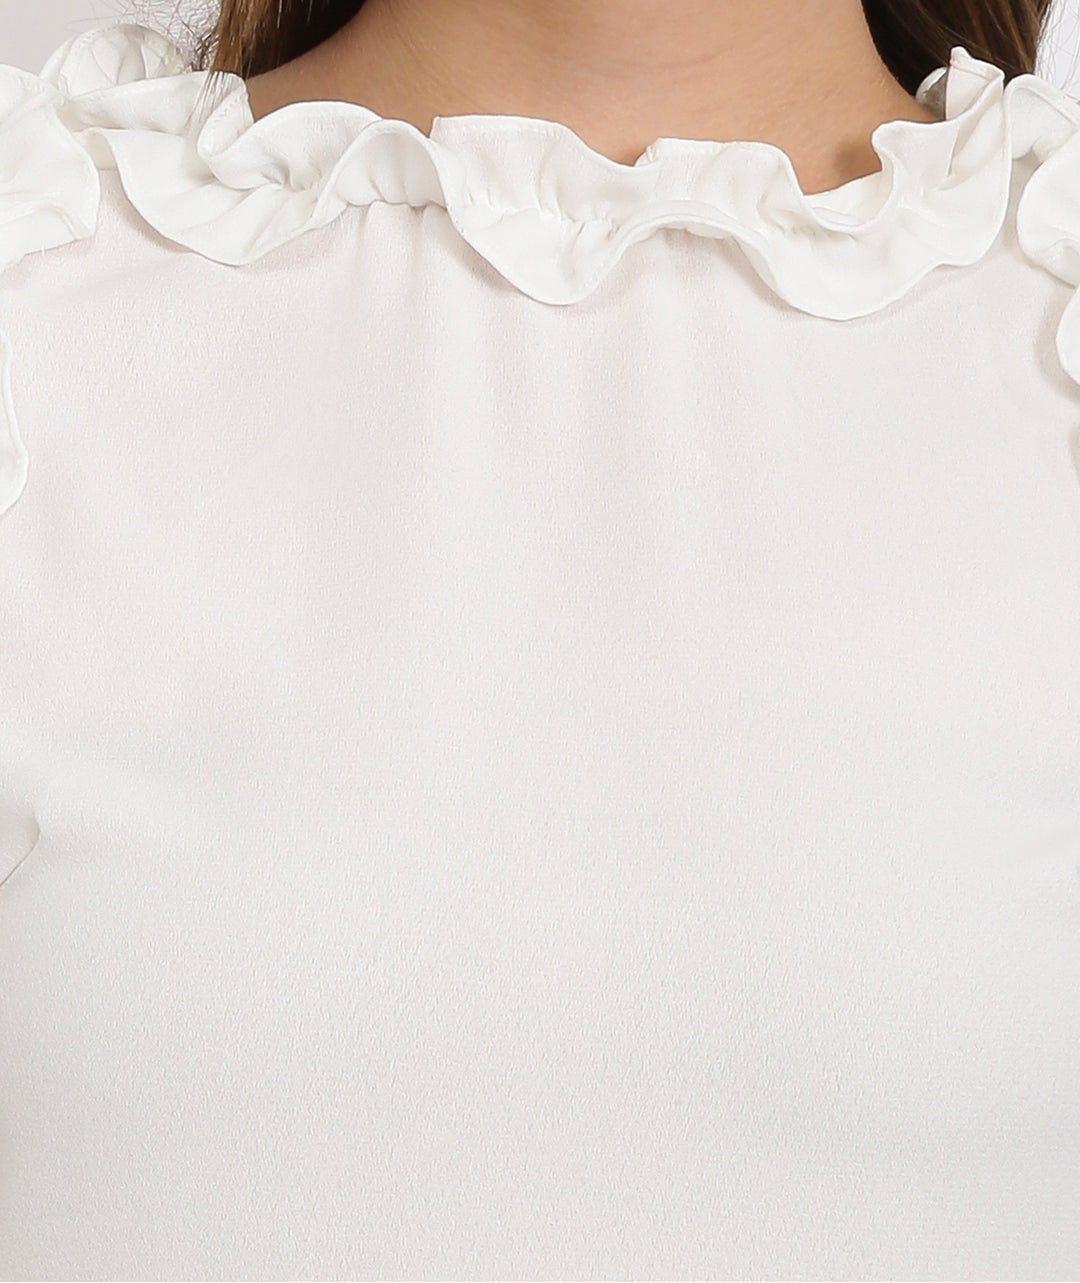 White Sleeveless Lace Frilled Top